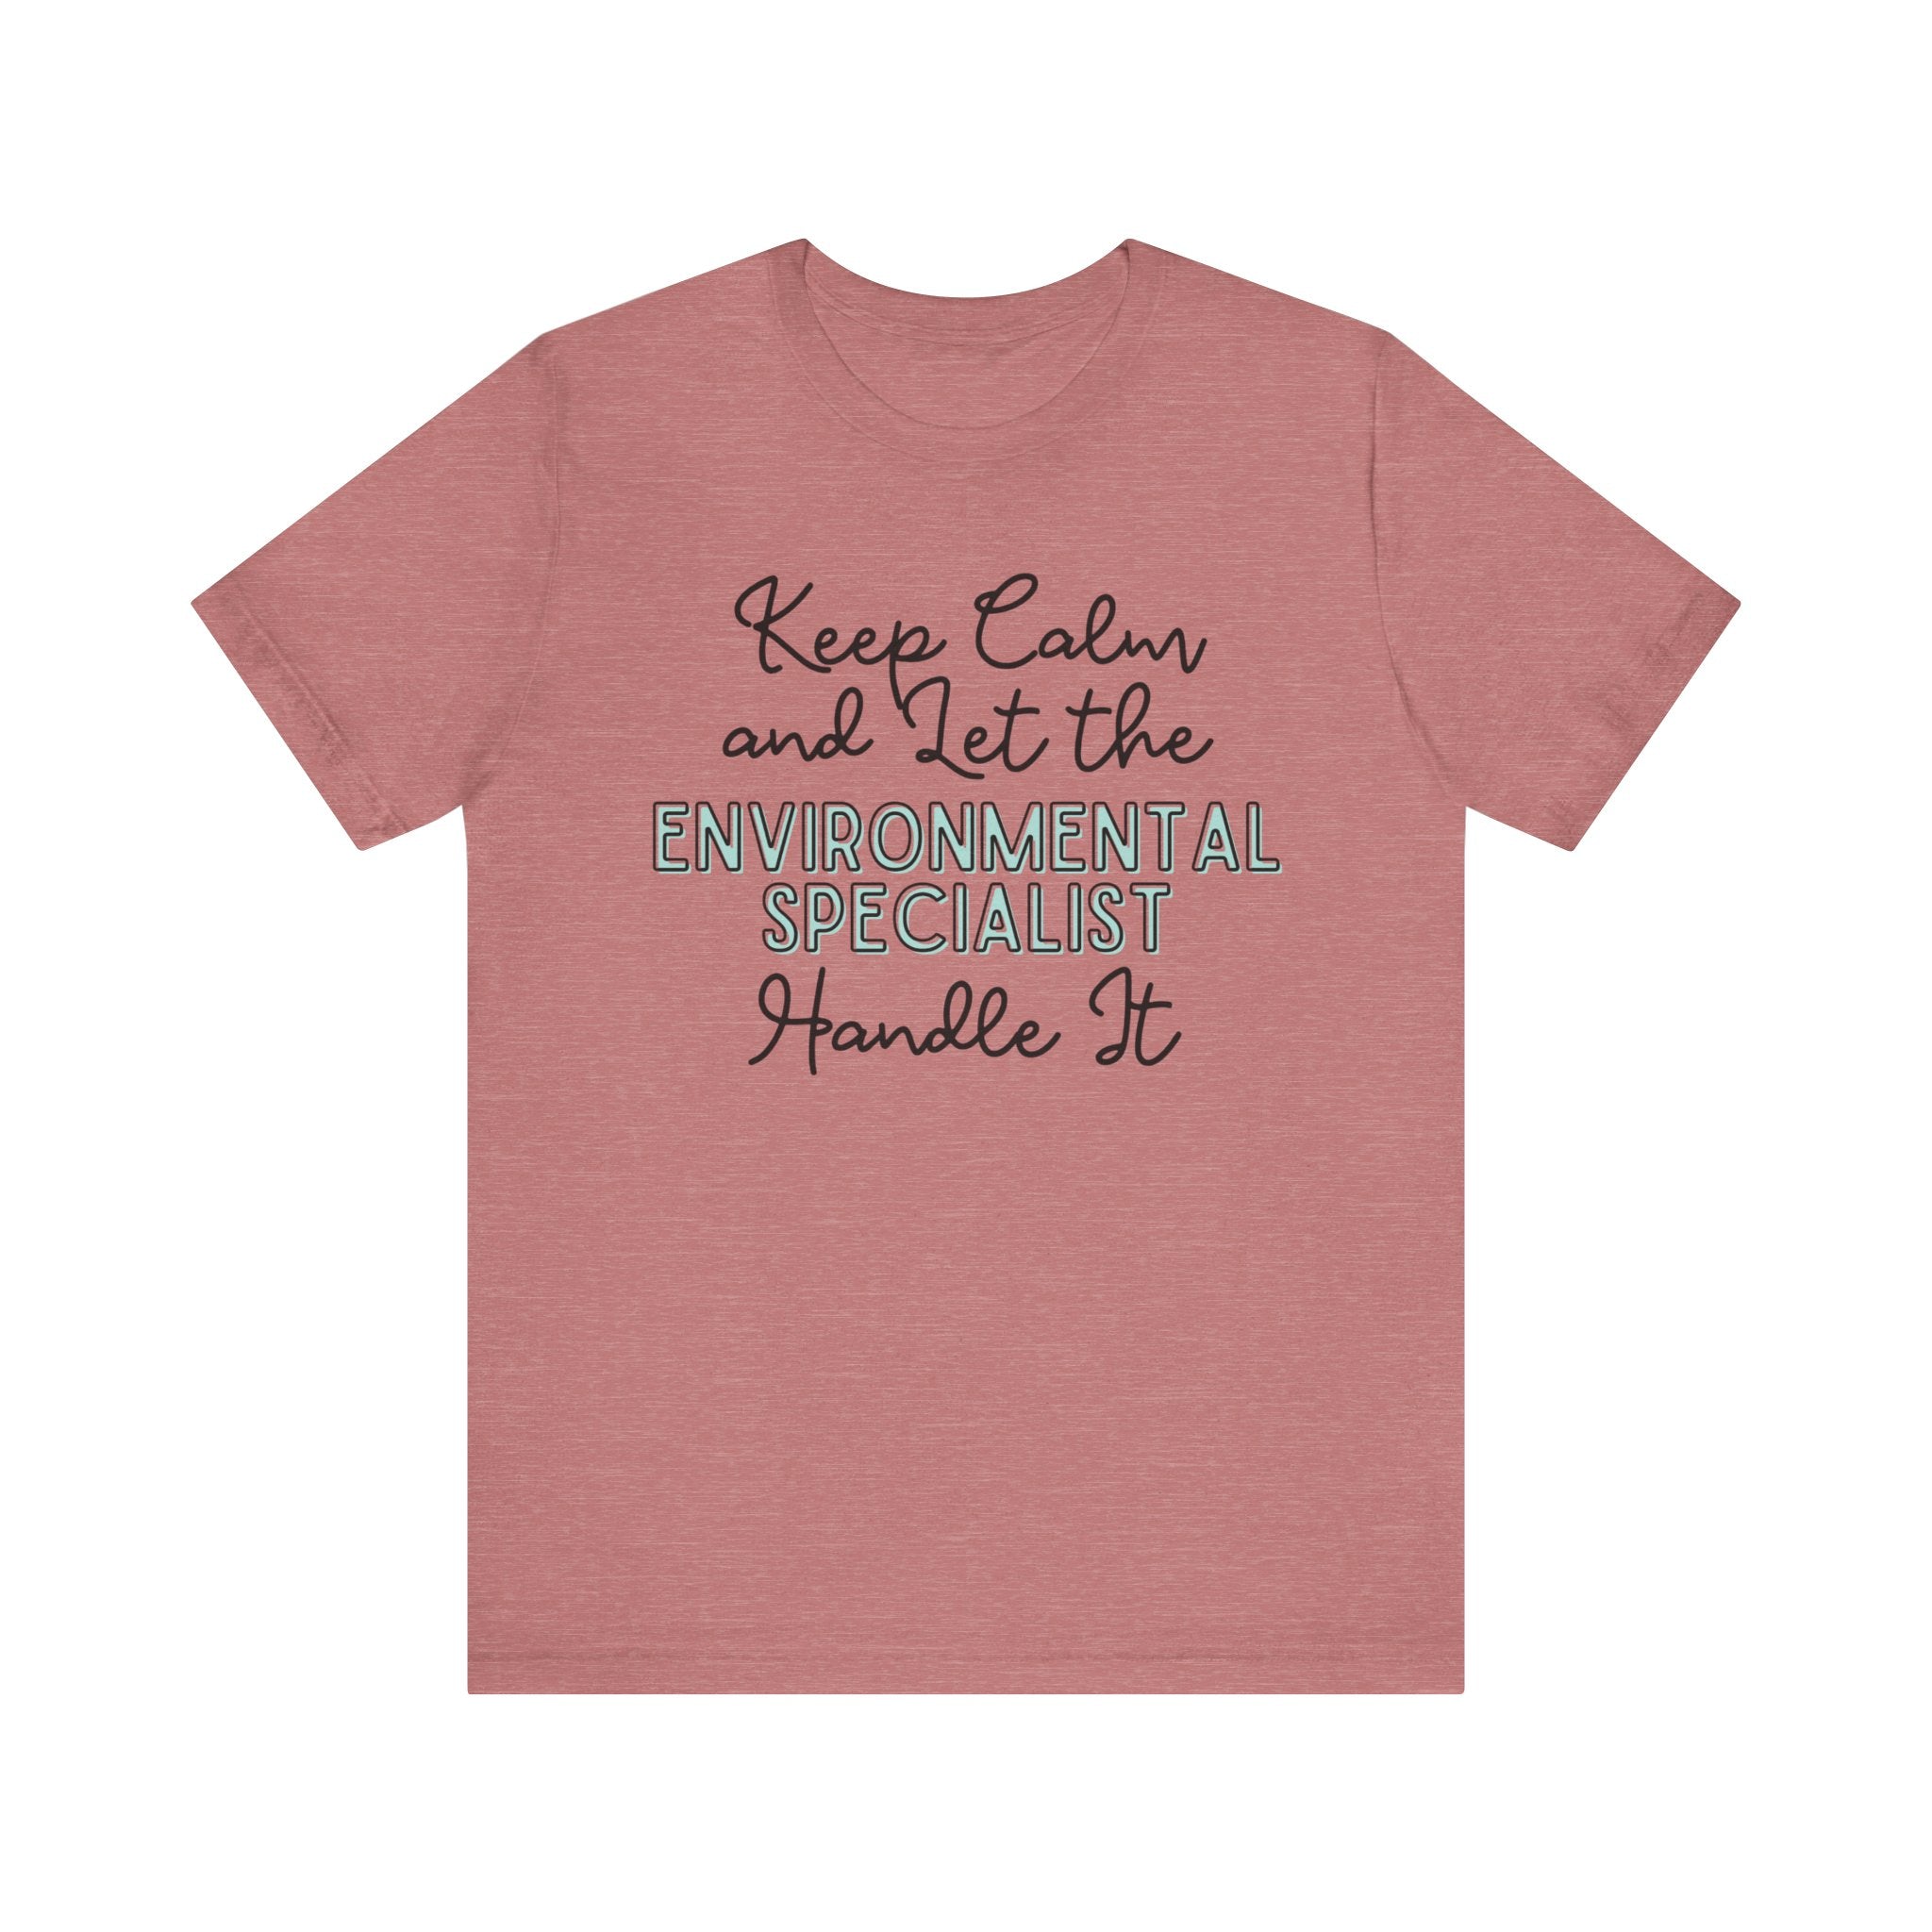 Keep Calm and let the Environmental Specialist handle It - Jersey Short Sleeve Tee